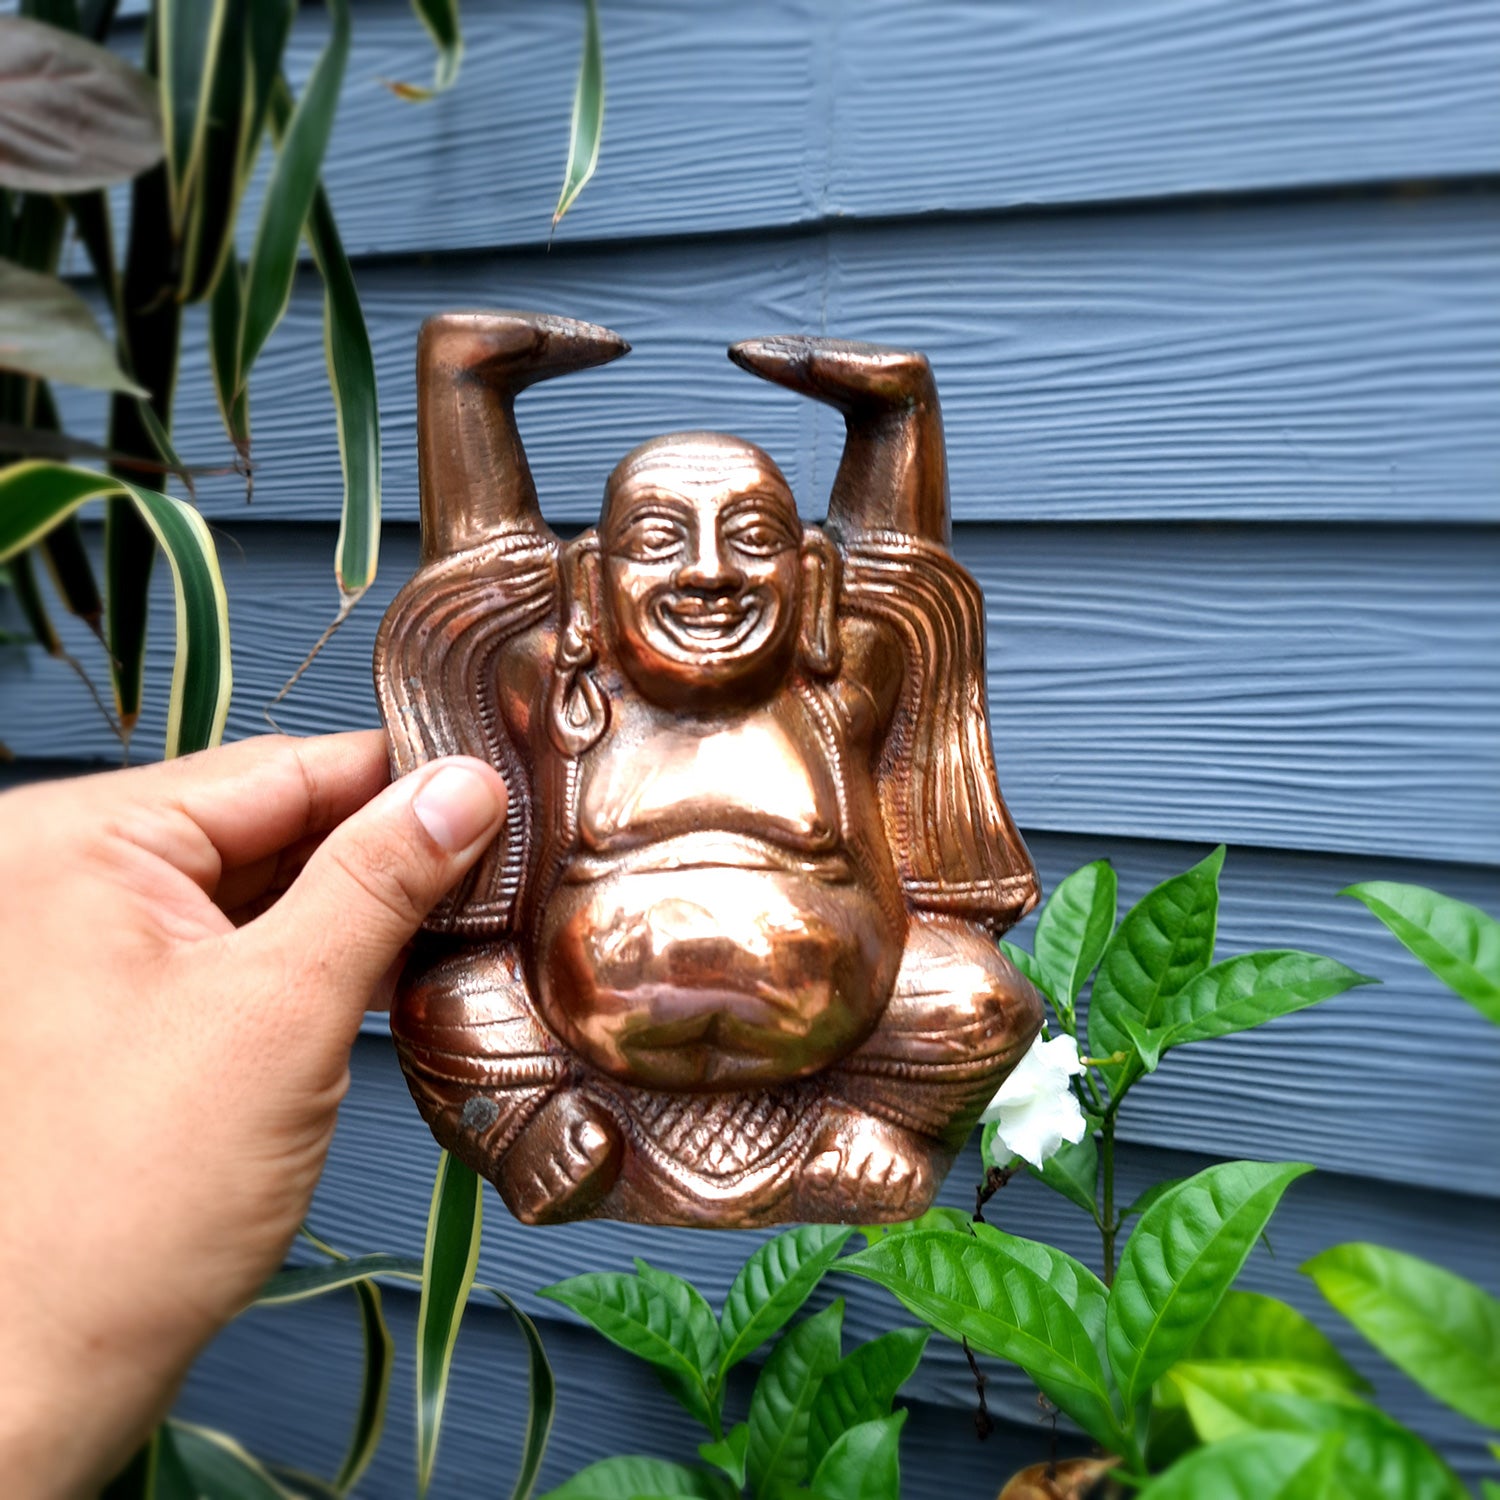 Laughing Buddha Showpiece For Good Luck | Laughing Buddha for Happiness, Positivity, Home Decor & Gift - 7 inch